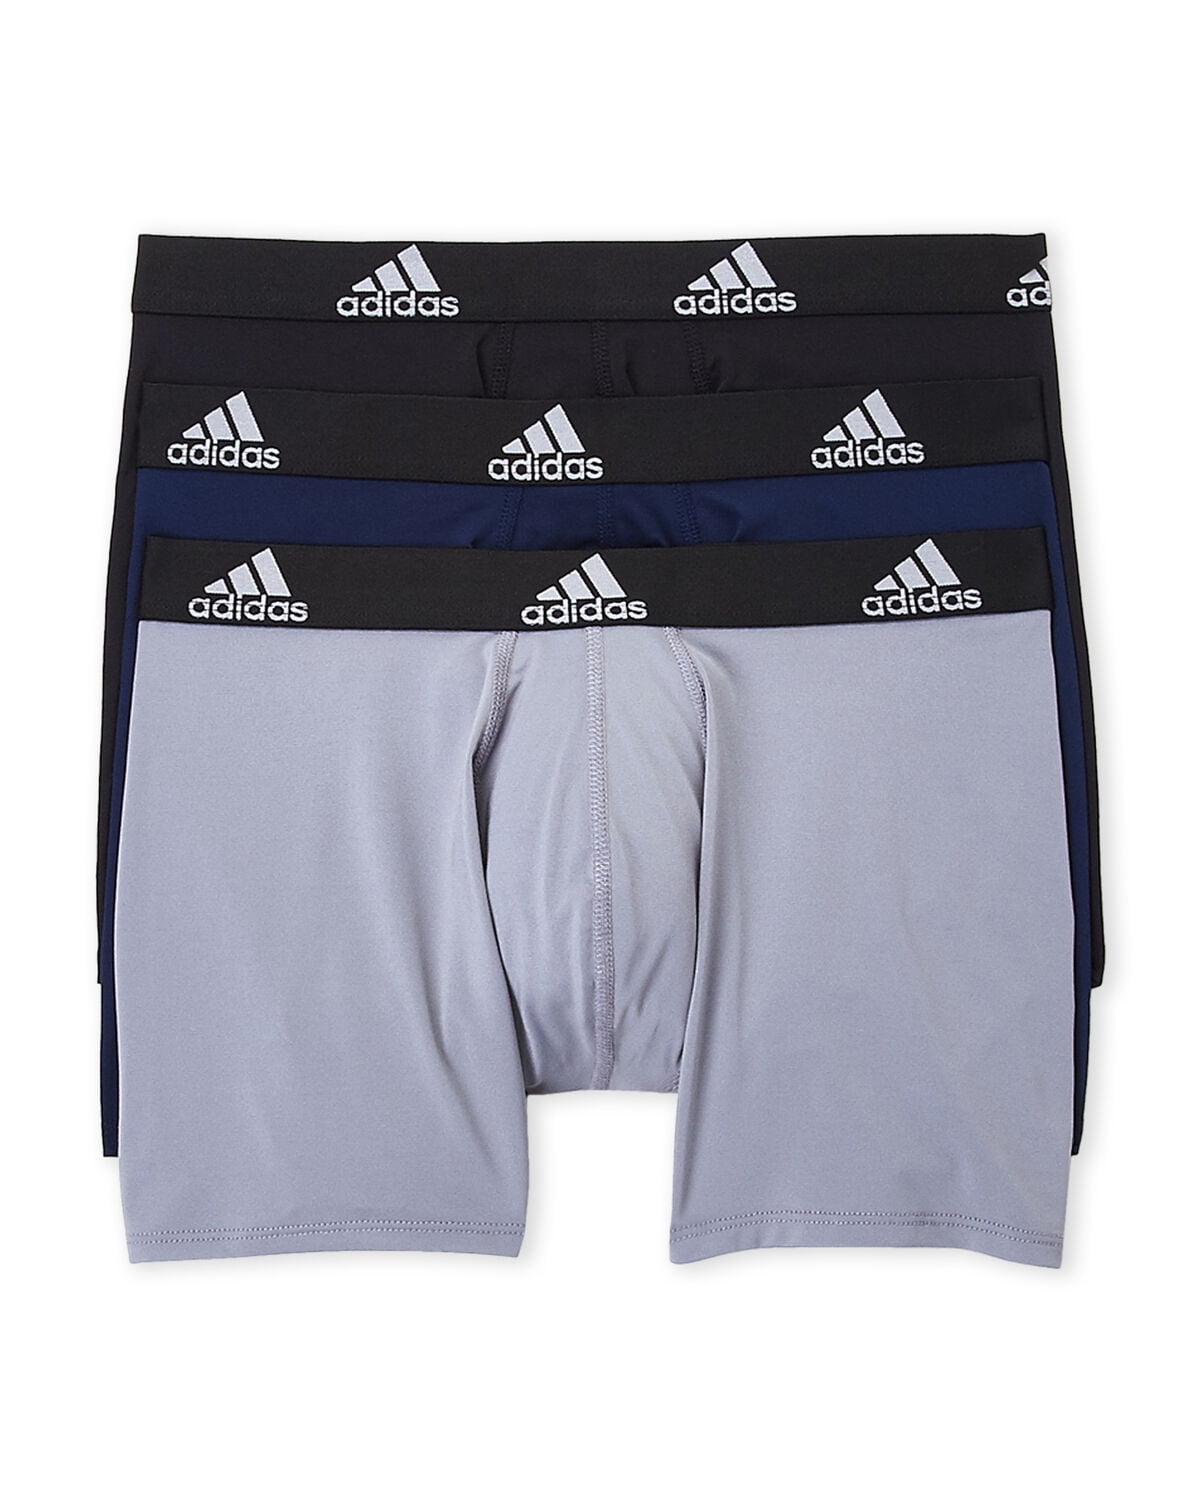 adidas men's climacool 7 midway briefs 94